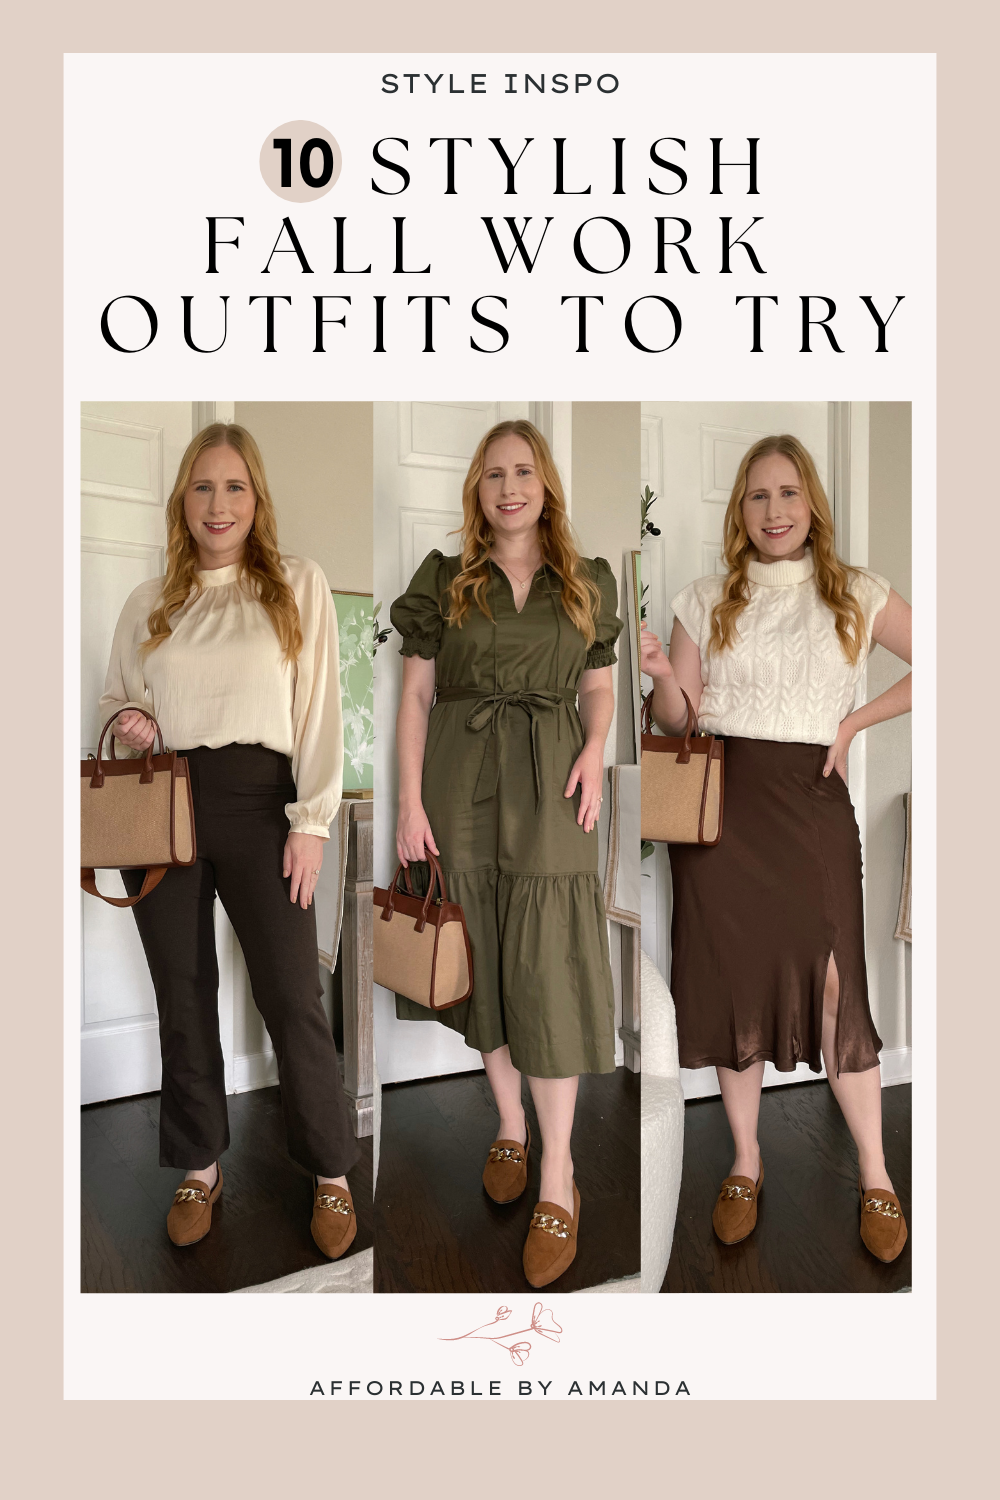 Classy Chic Outfits to Wear to Work This Fall